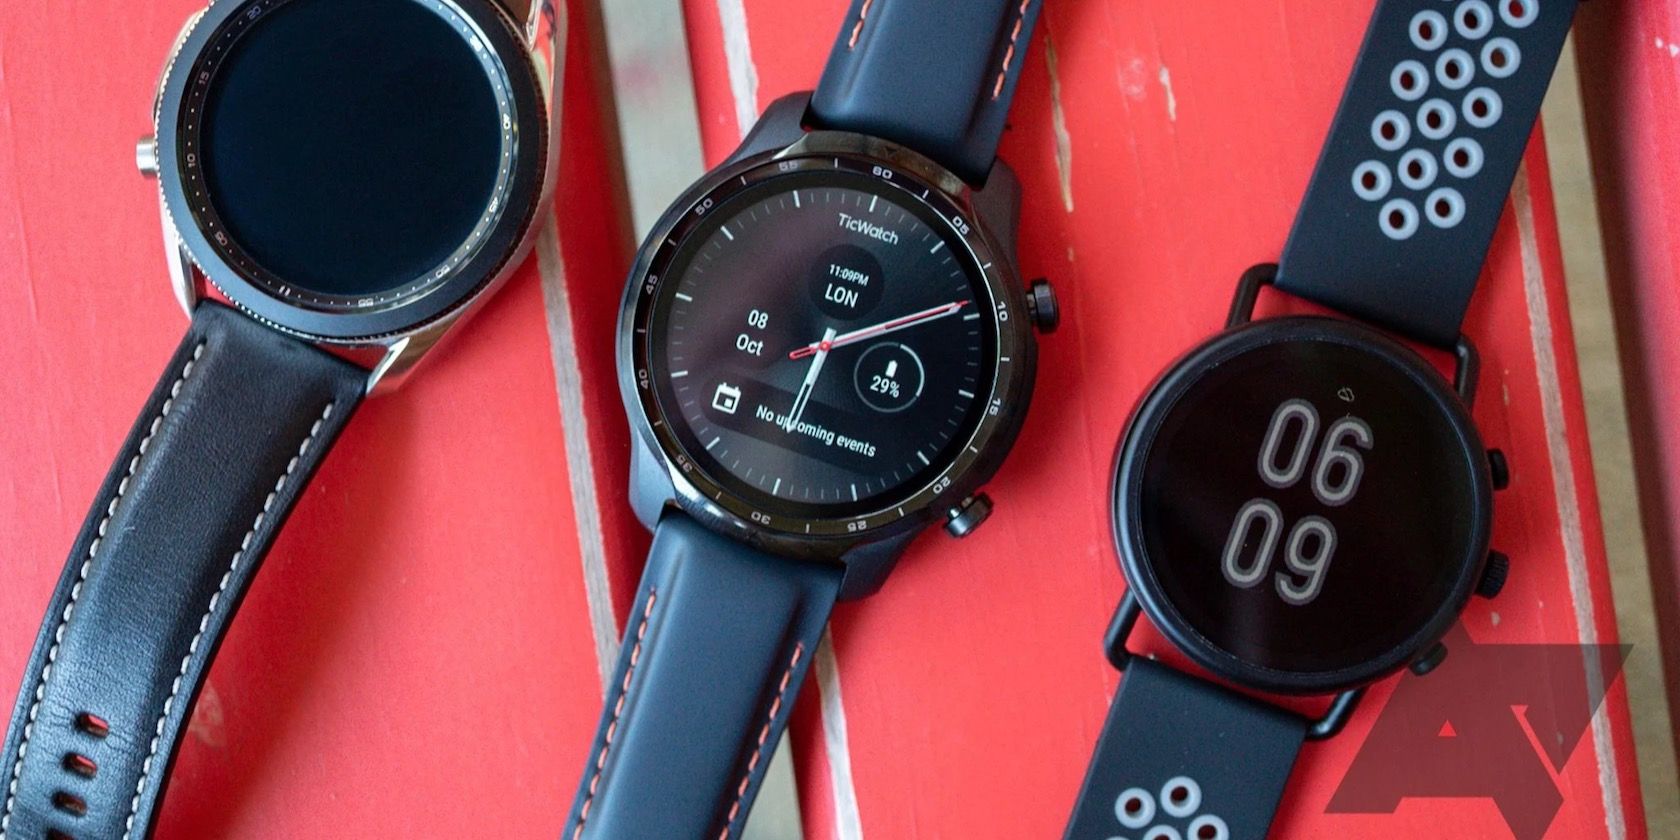 Three smartwatches on a red bench.